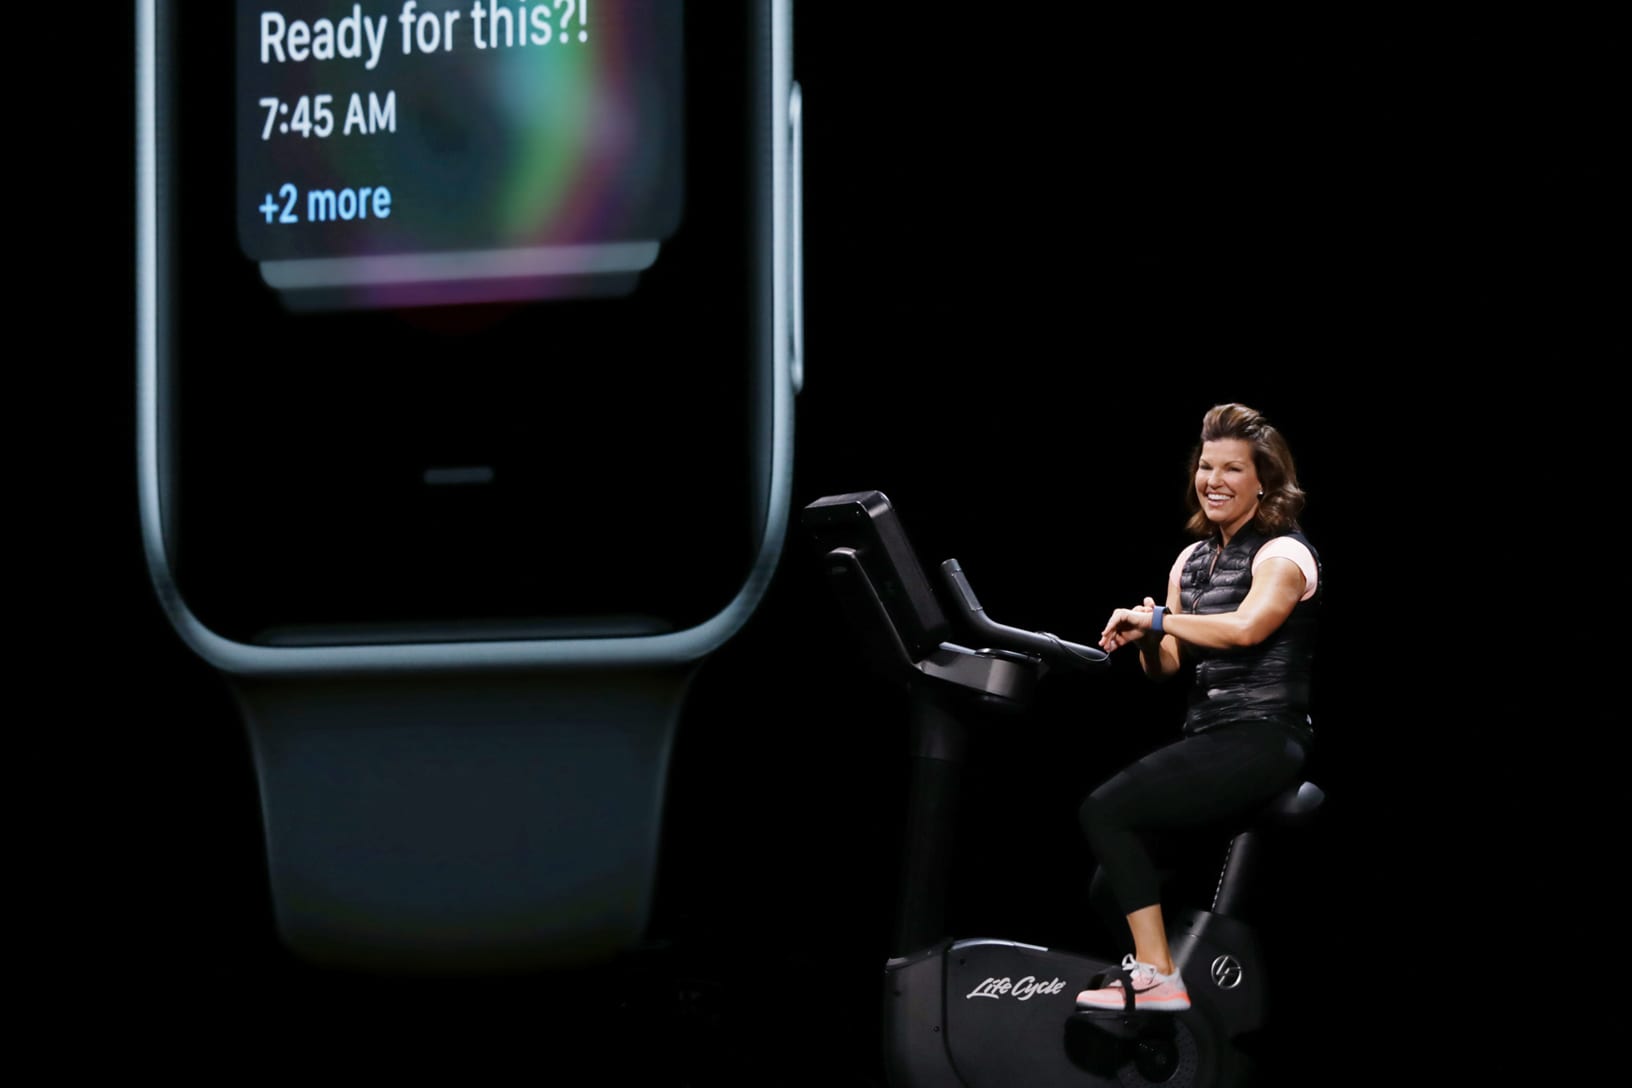 Julz Arney hops on a stationary bike to demonstrate new watchOS 5 capabilities